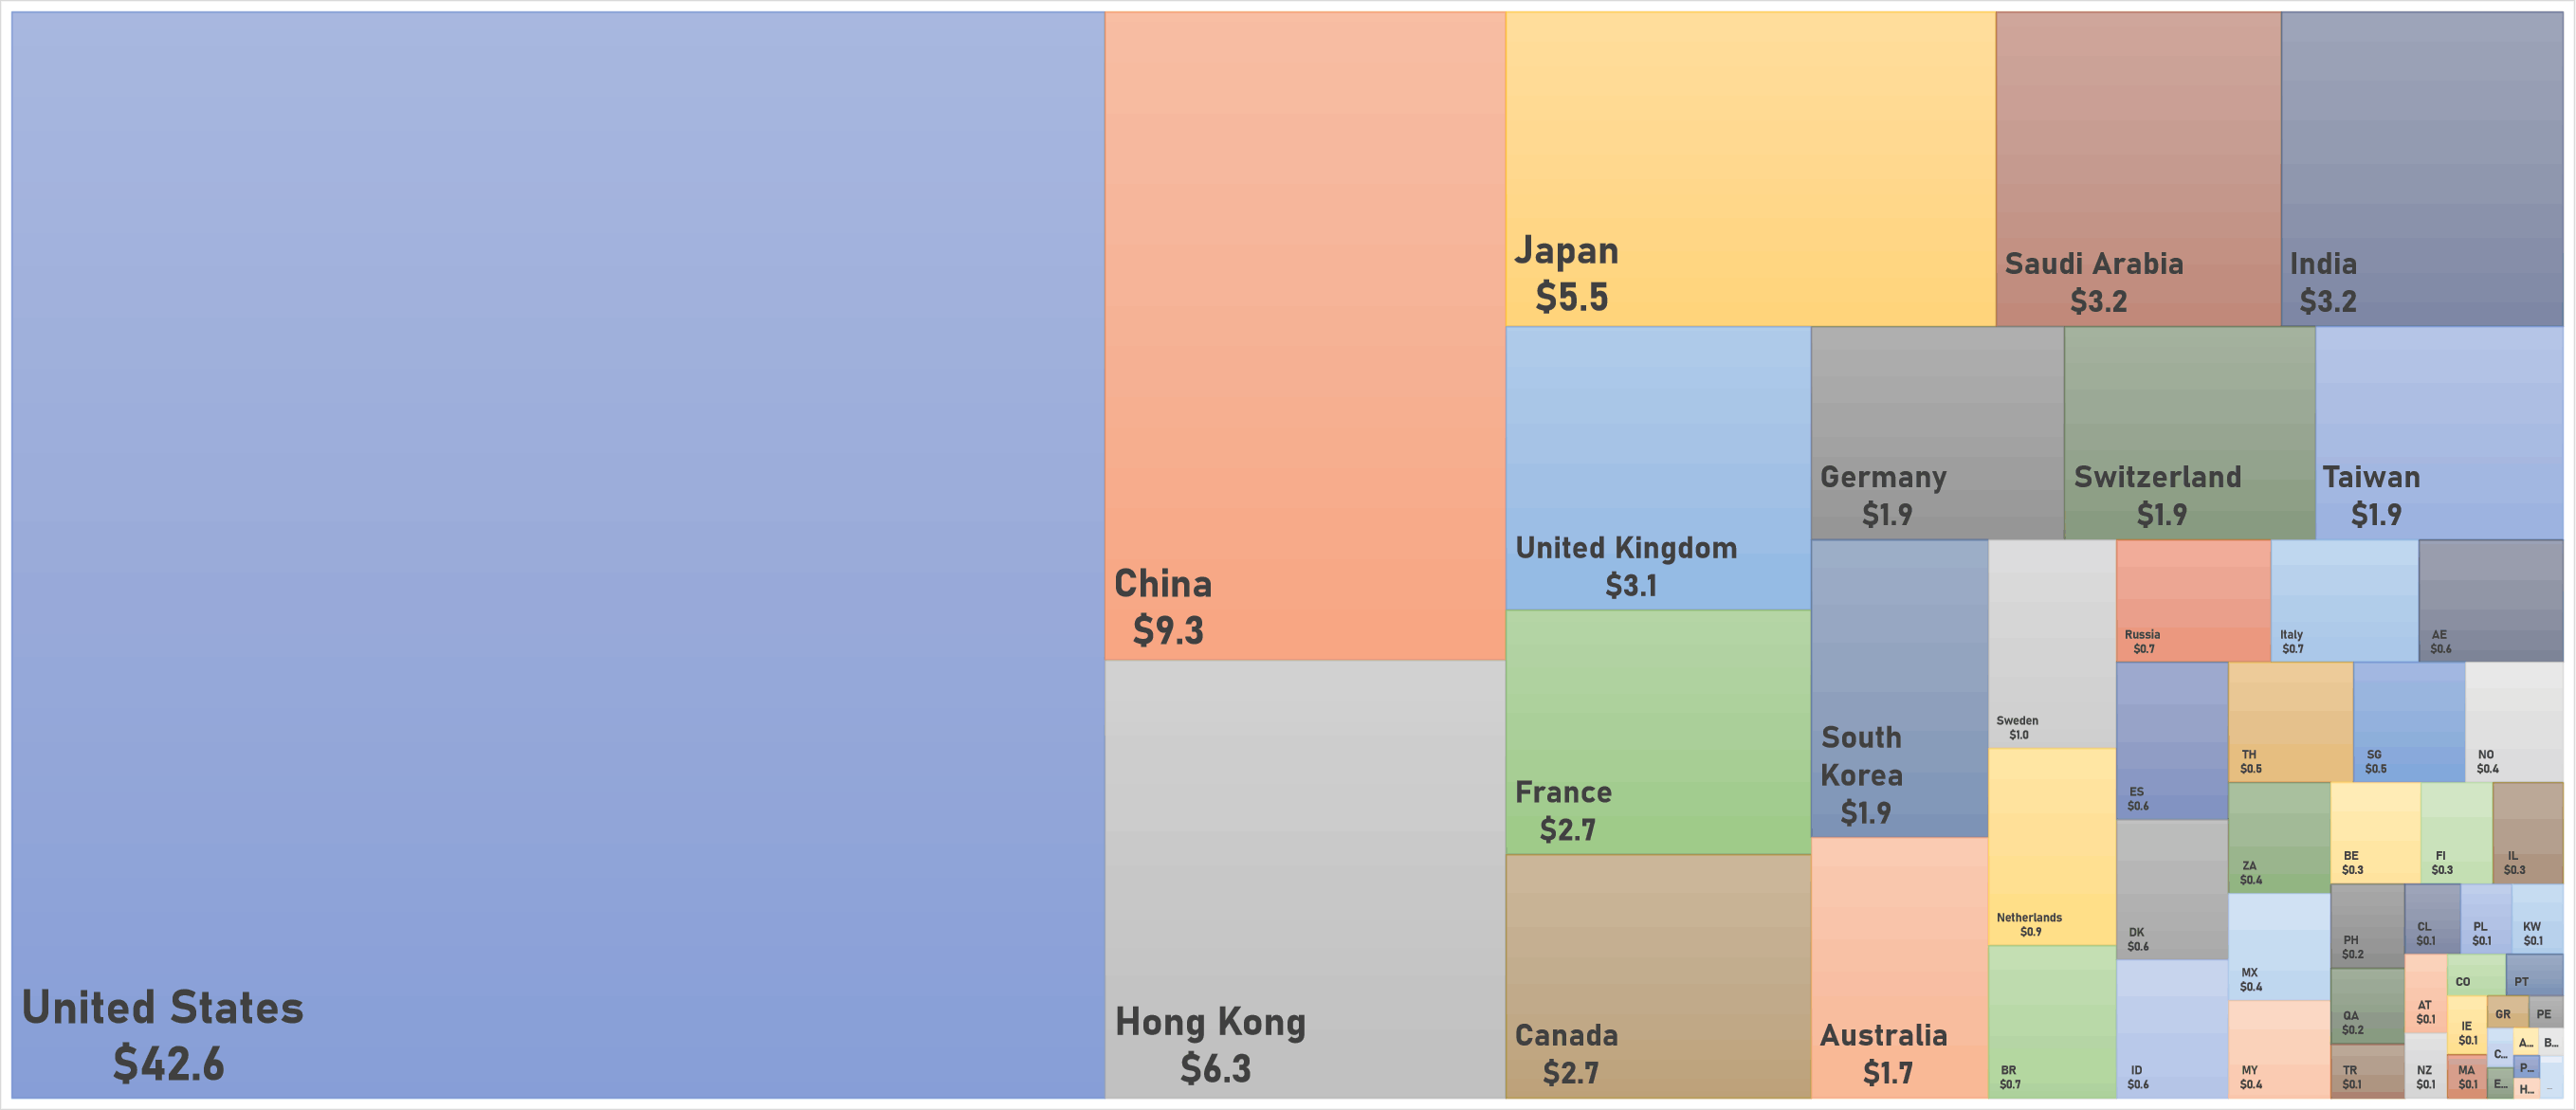 World Market Capitalization in US trillion, broken down by country | Sources: phipost.com, FactSet data